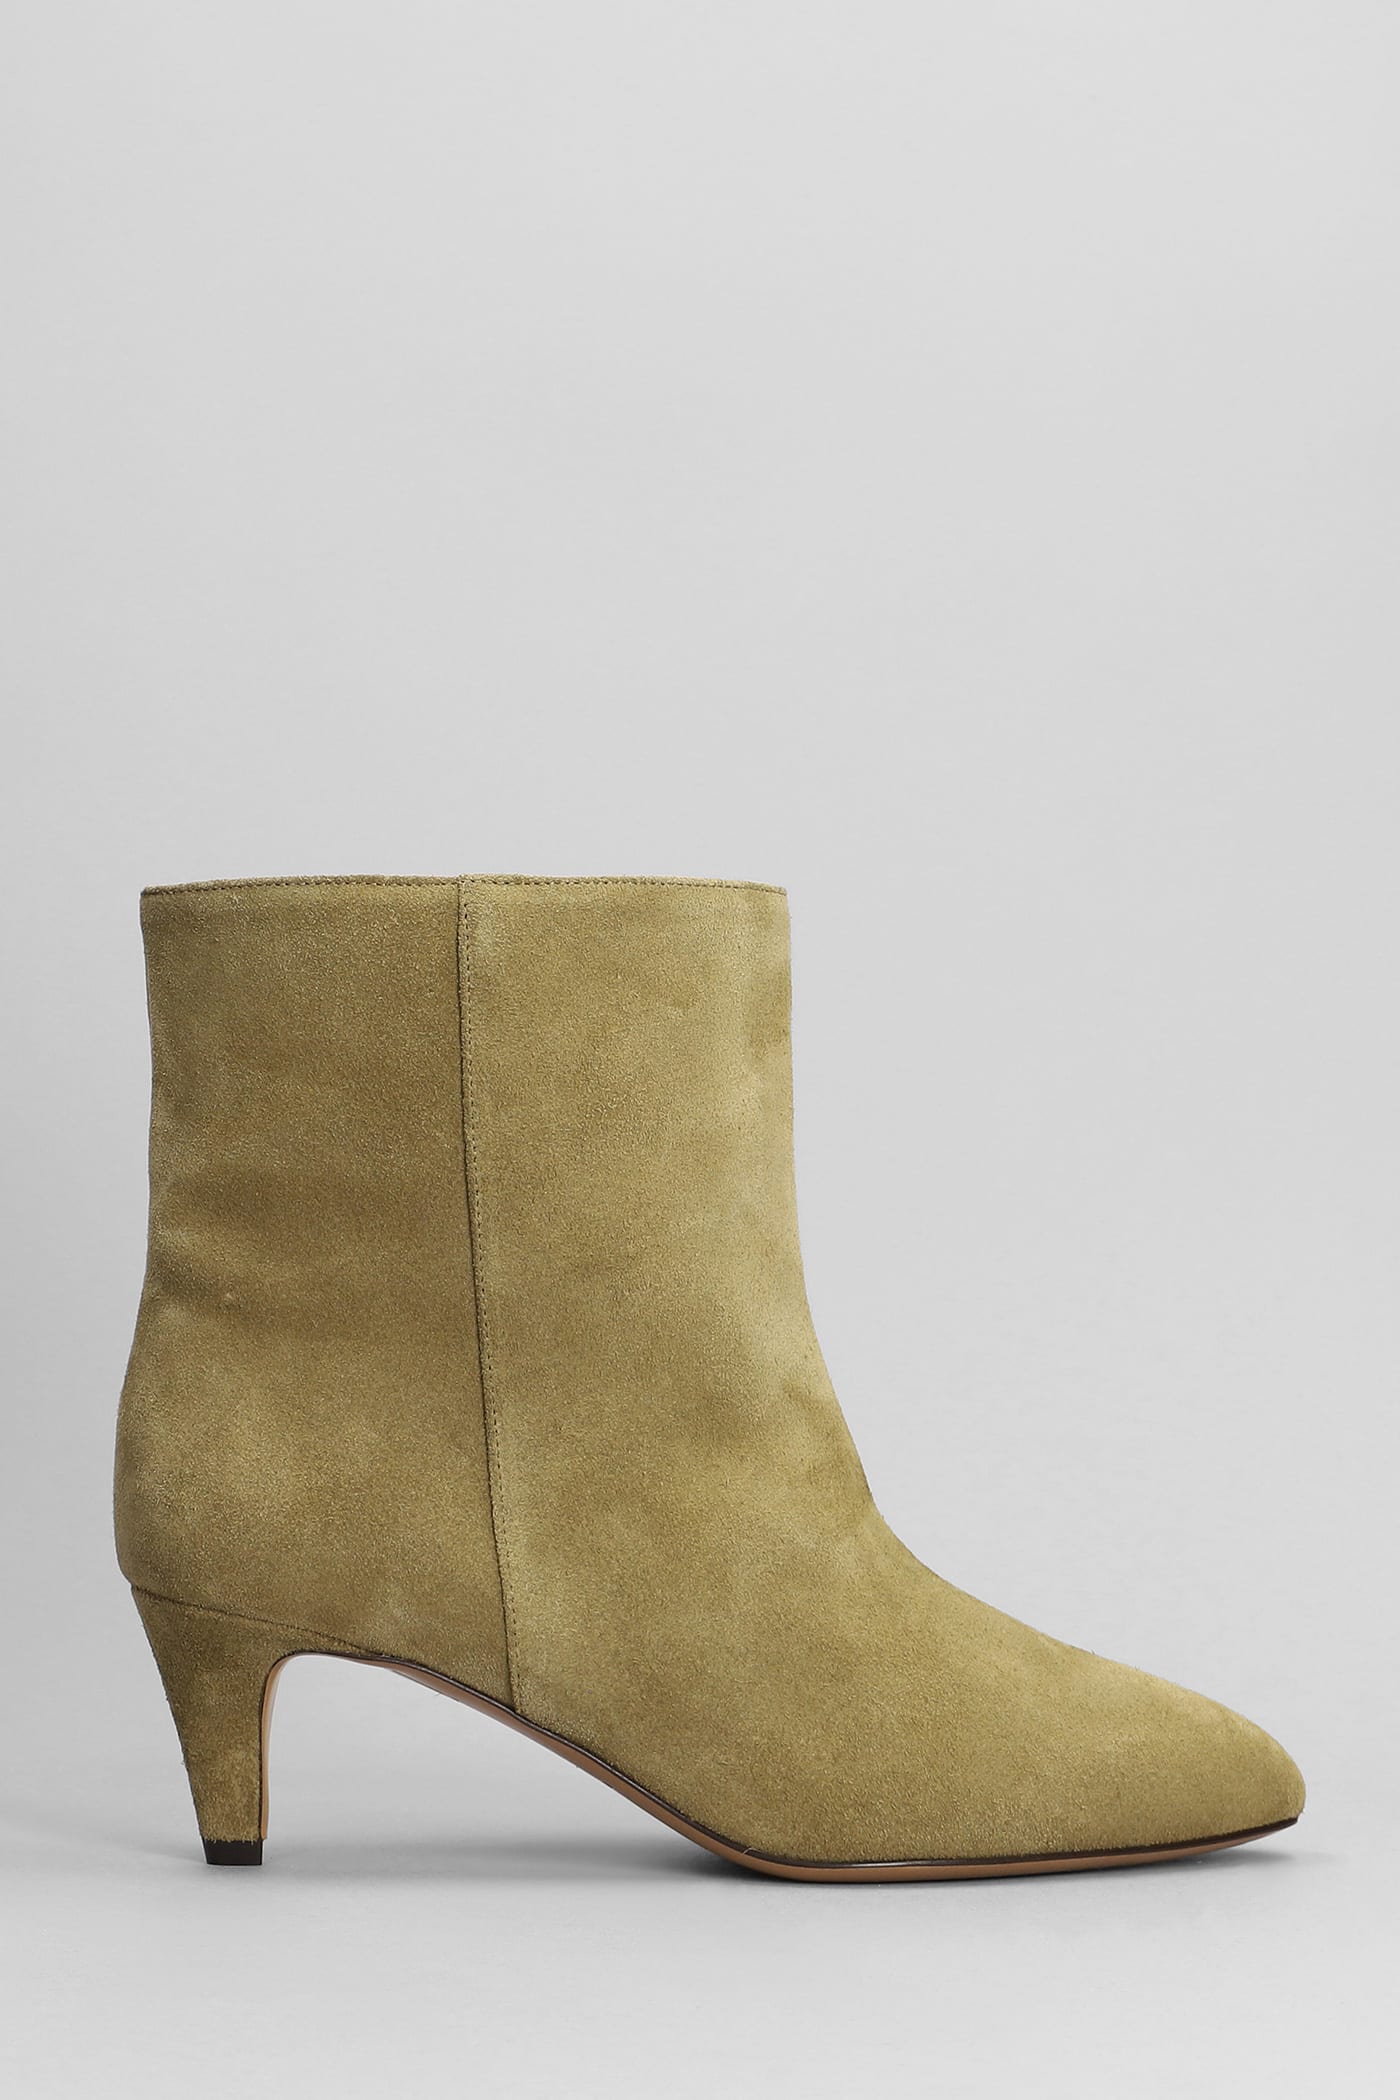 Isabel Marant Daxi Low Heels Ankle Boots In Taupe Suede